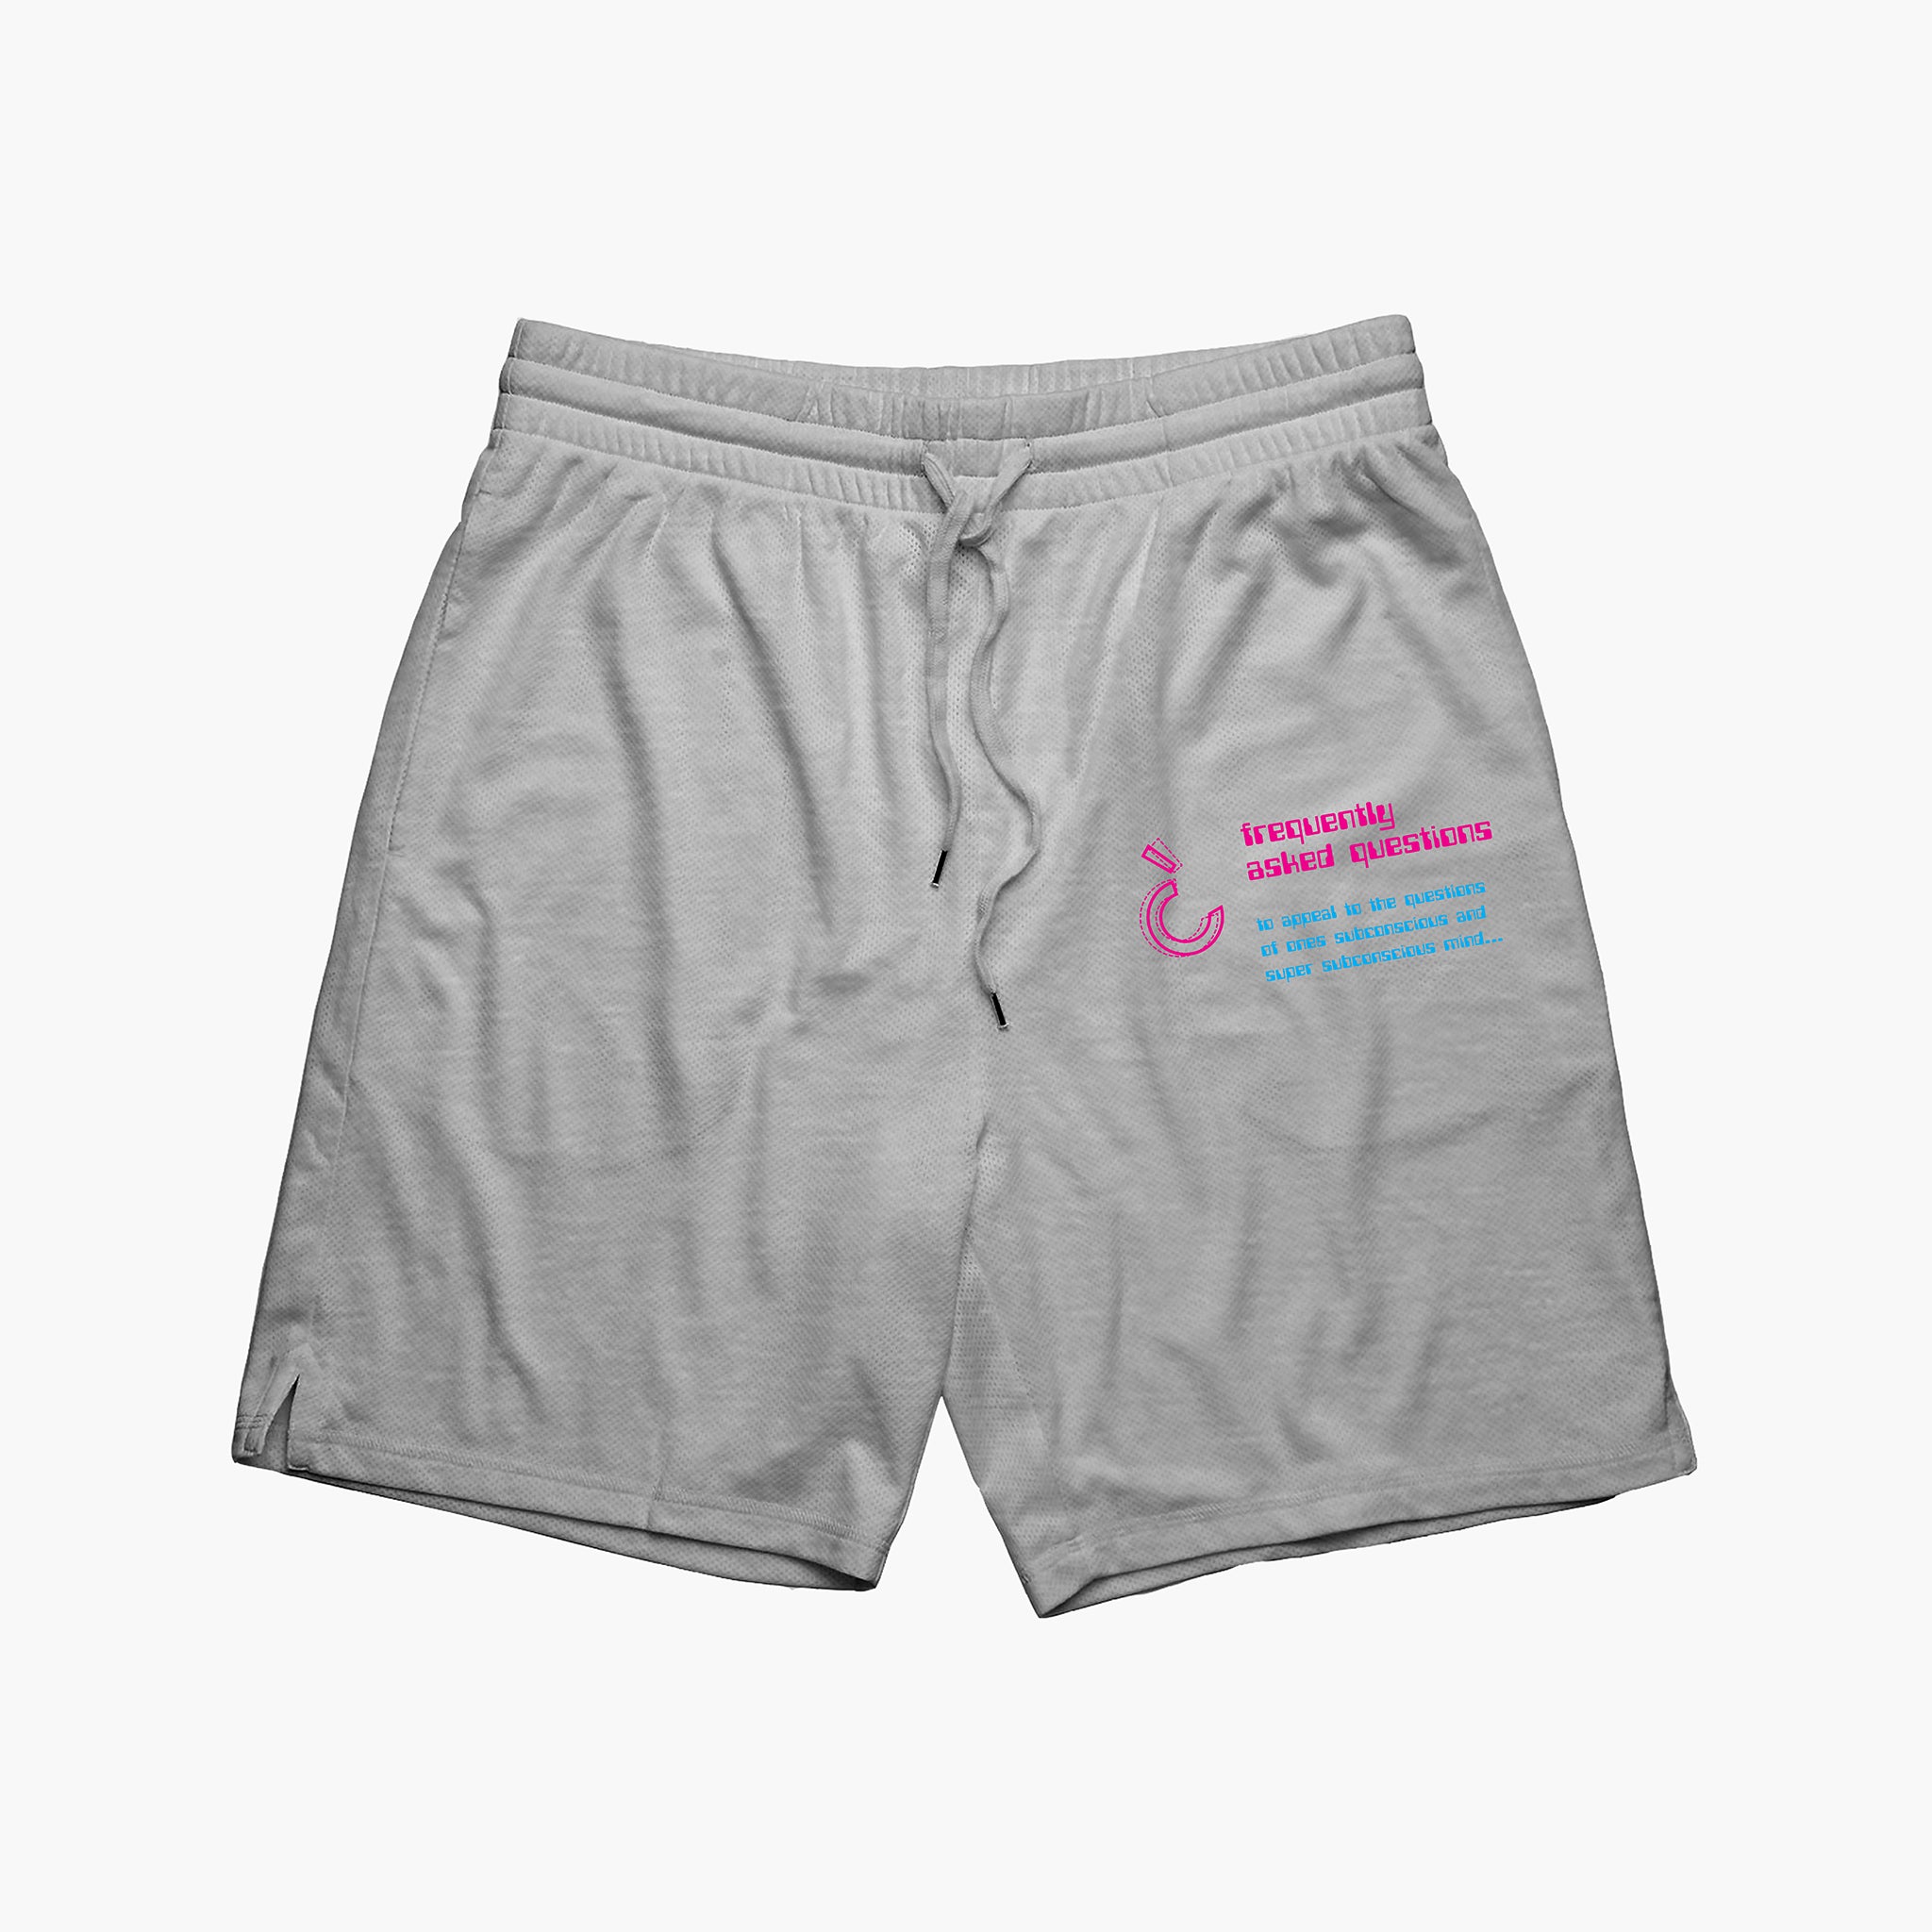 FAQ Desc Stadium Shorts - Frequently Asked Questions